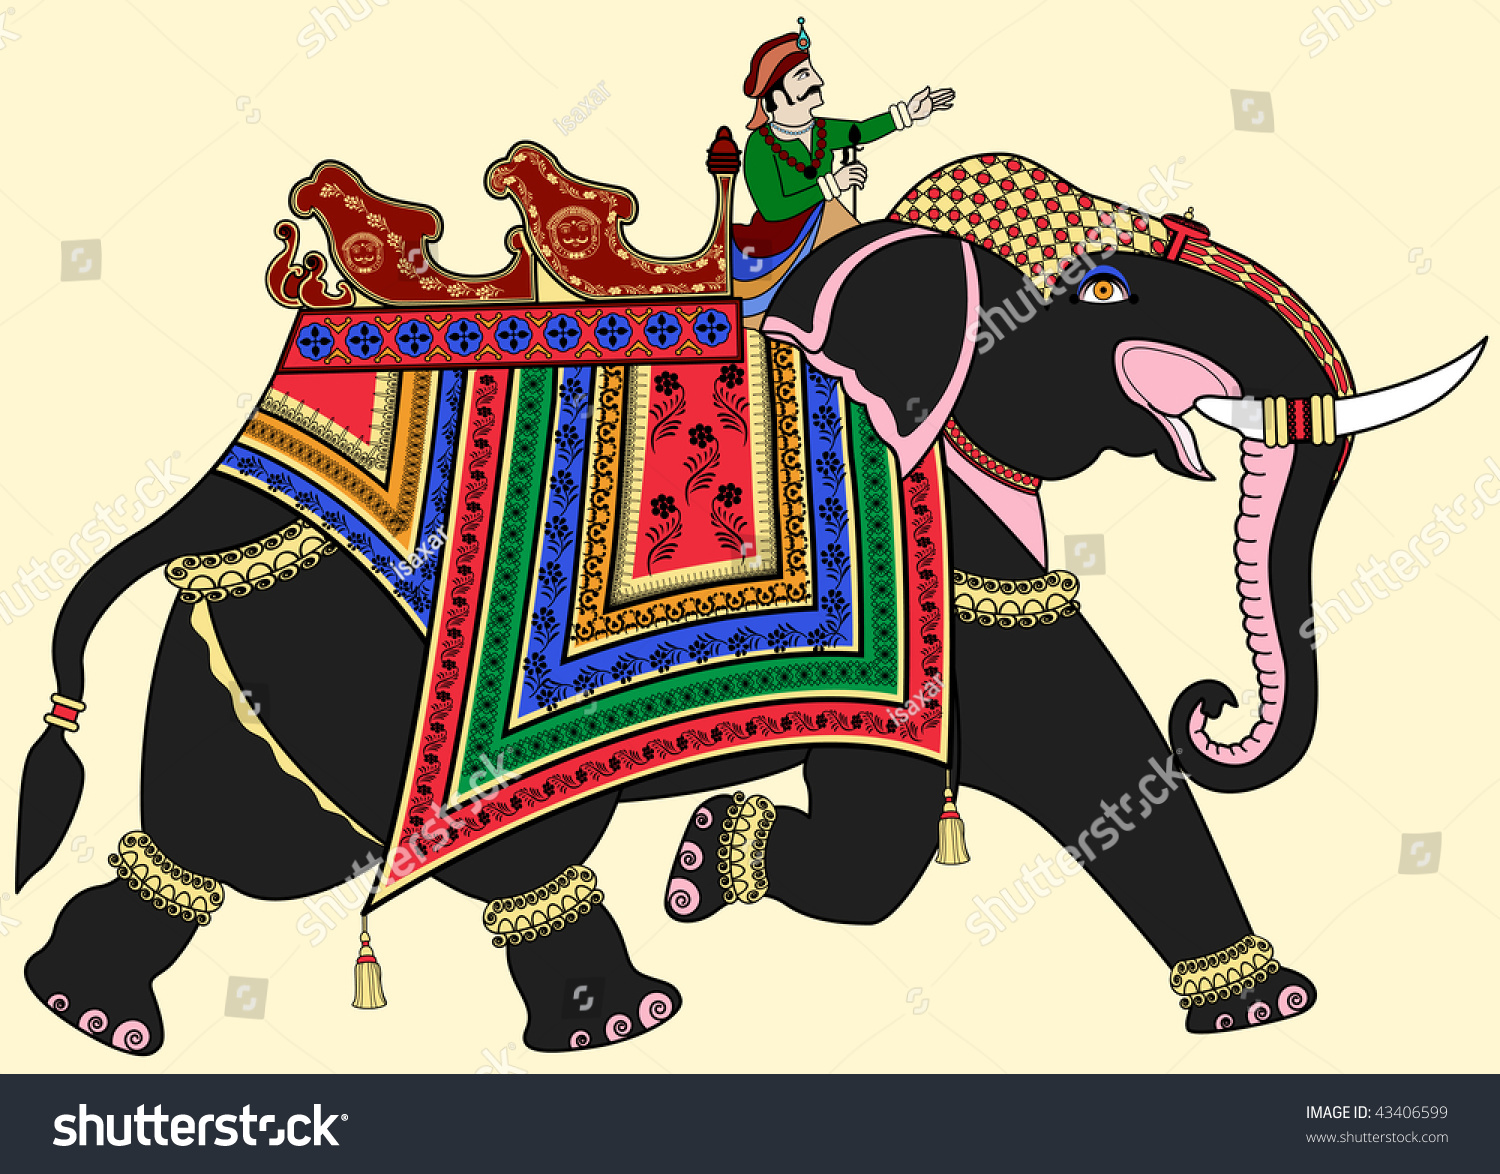 Vector Illustration Decorated Indian Elephant Stock Vector ...